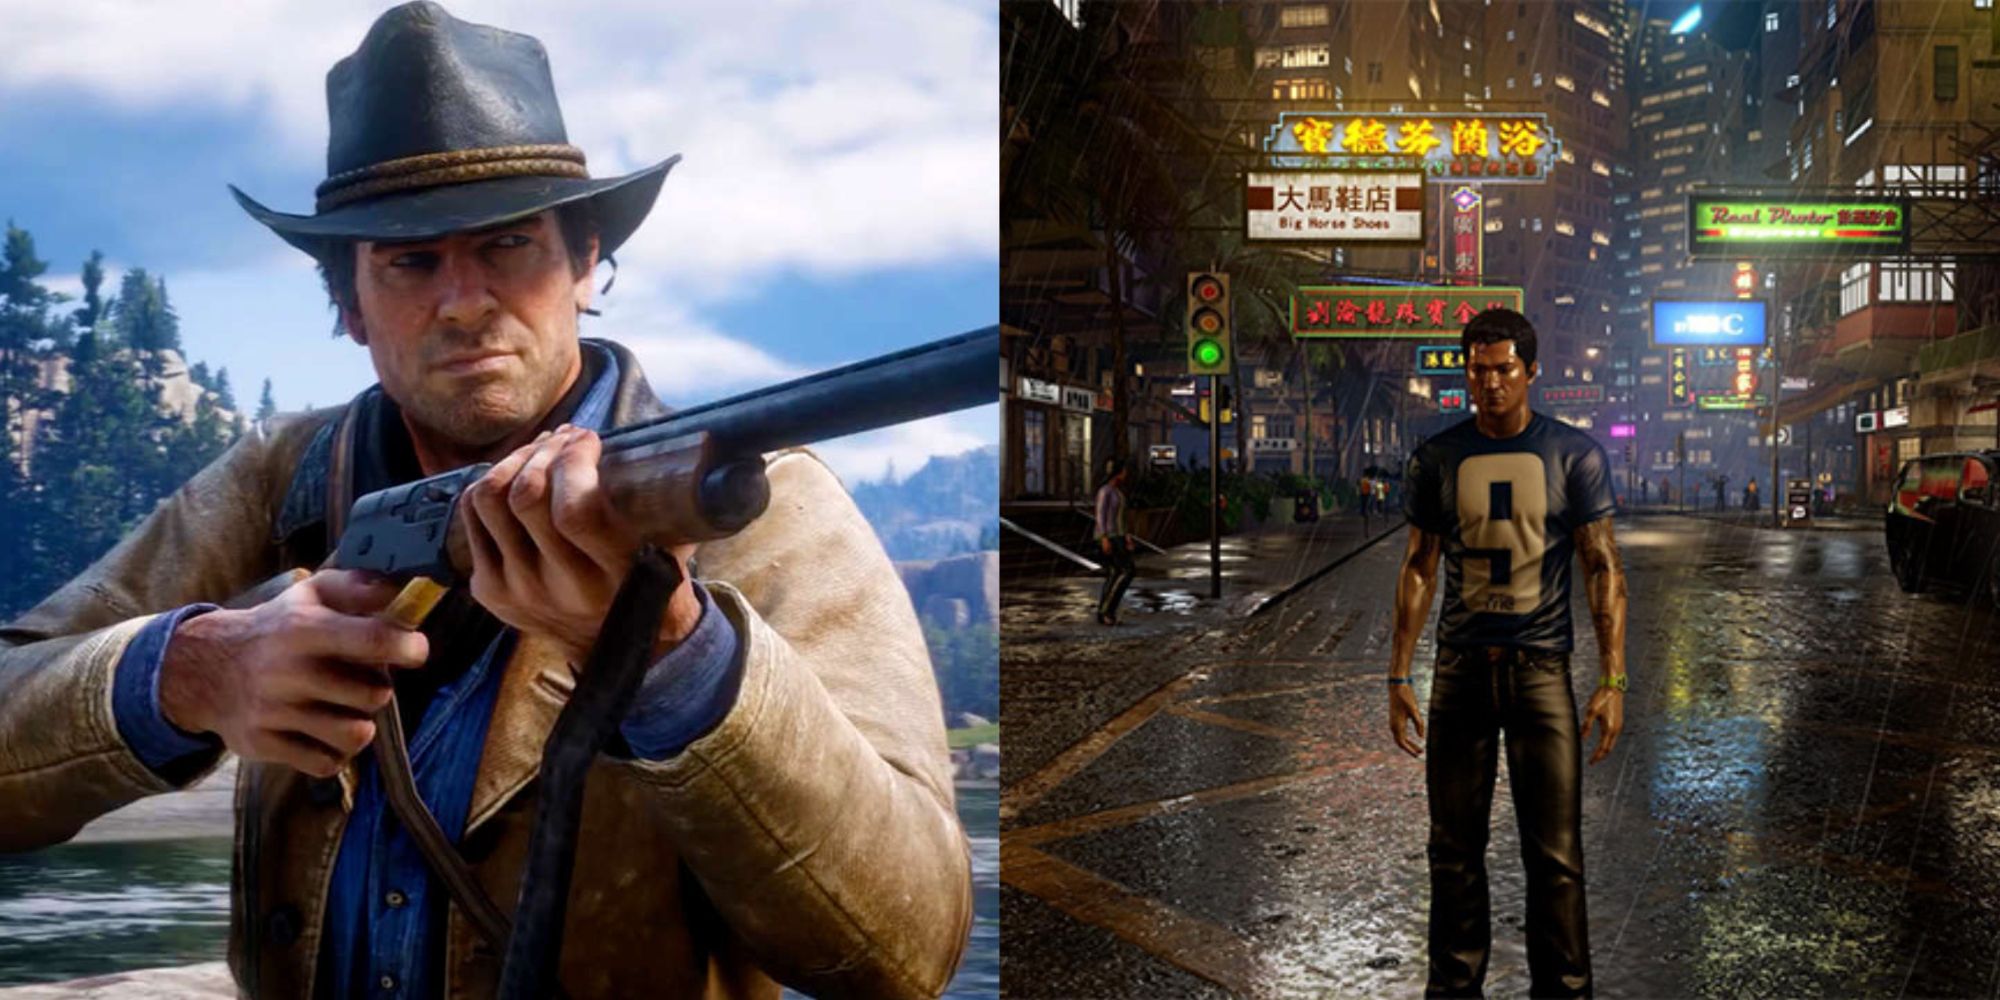 10 Most Realistic Video Games, According To Reddit